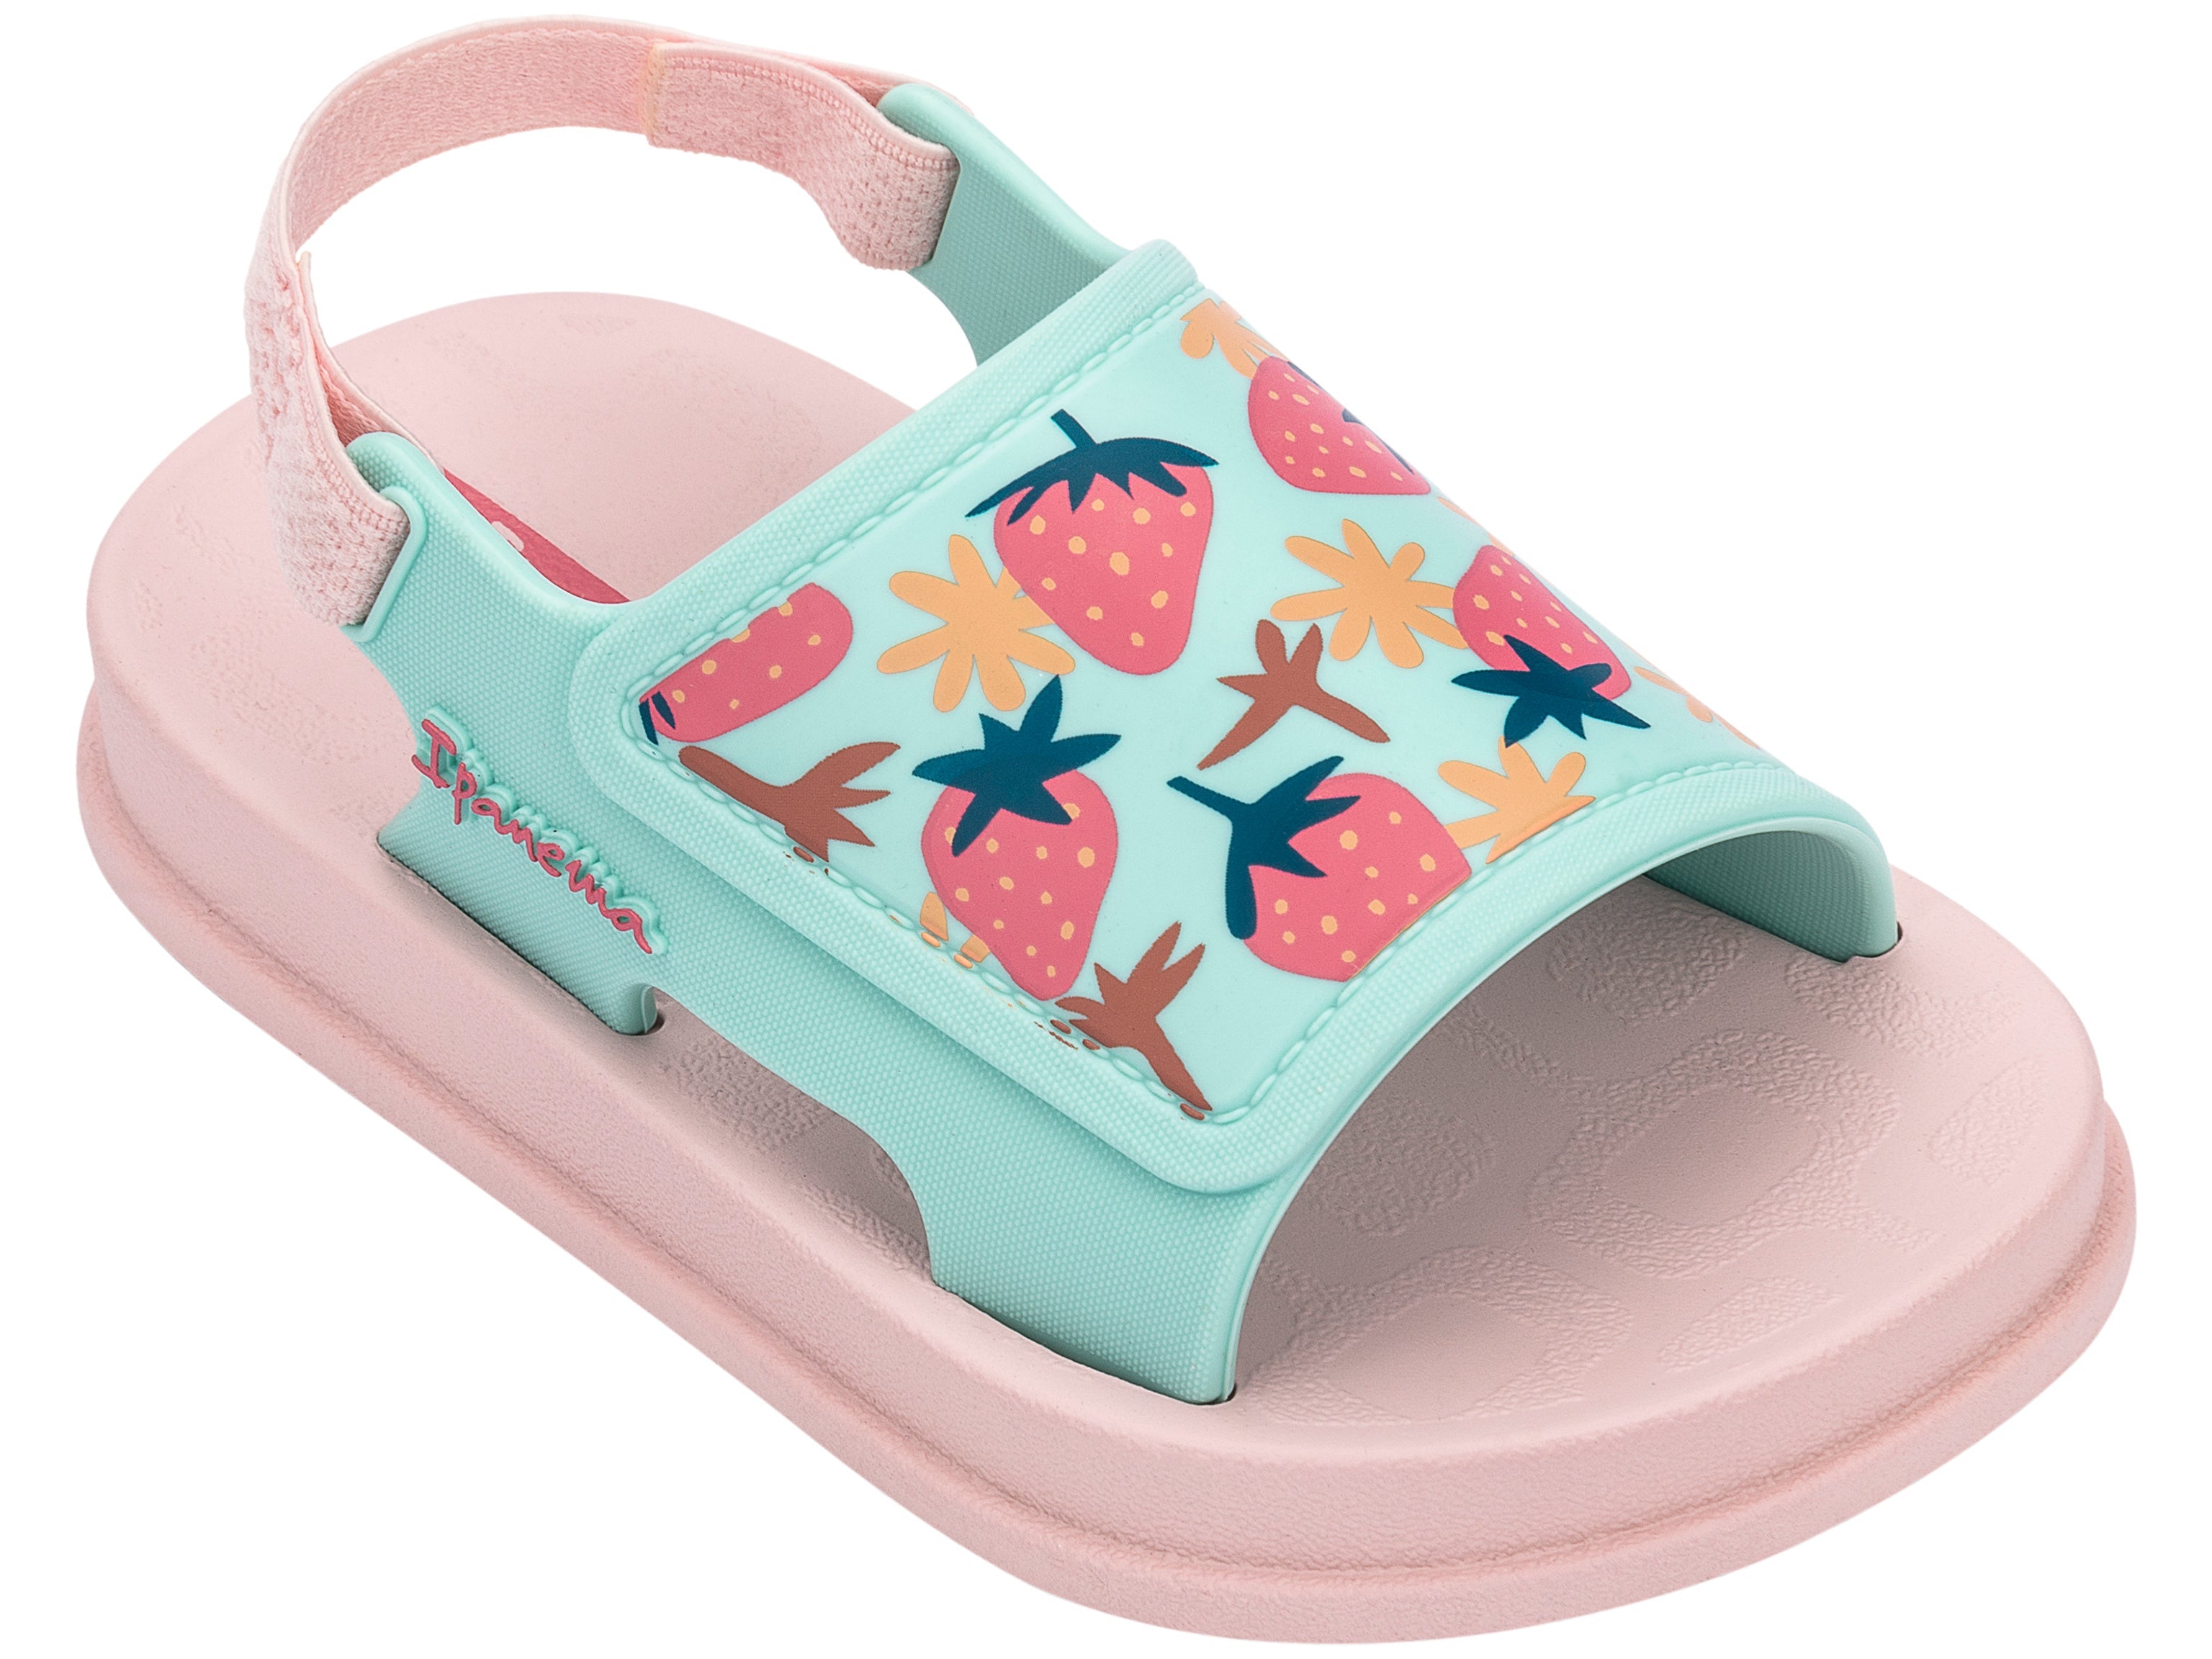 Angled view of a pink Ipanema Soft baby sandal with fruit print on the green upper.